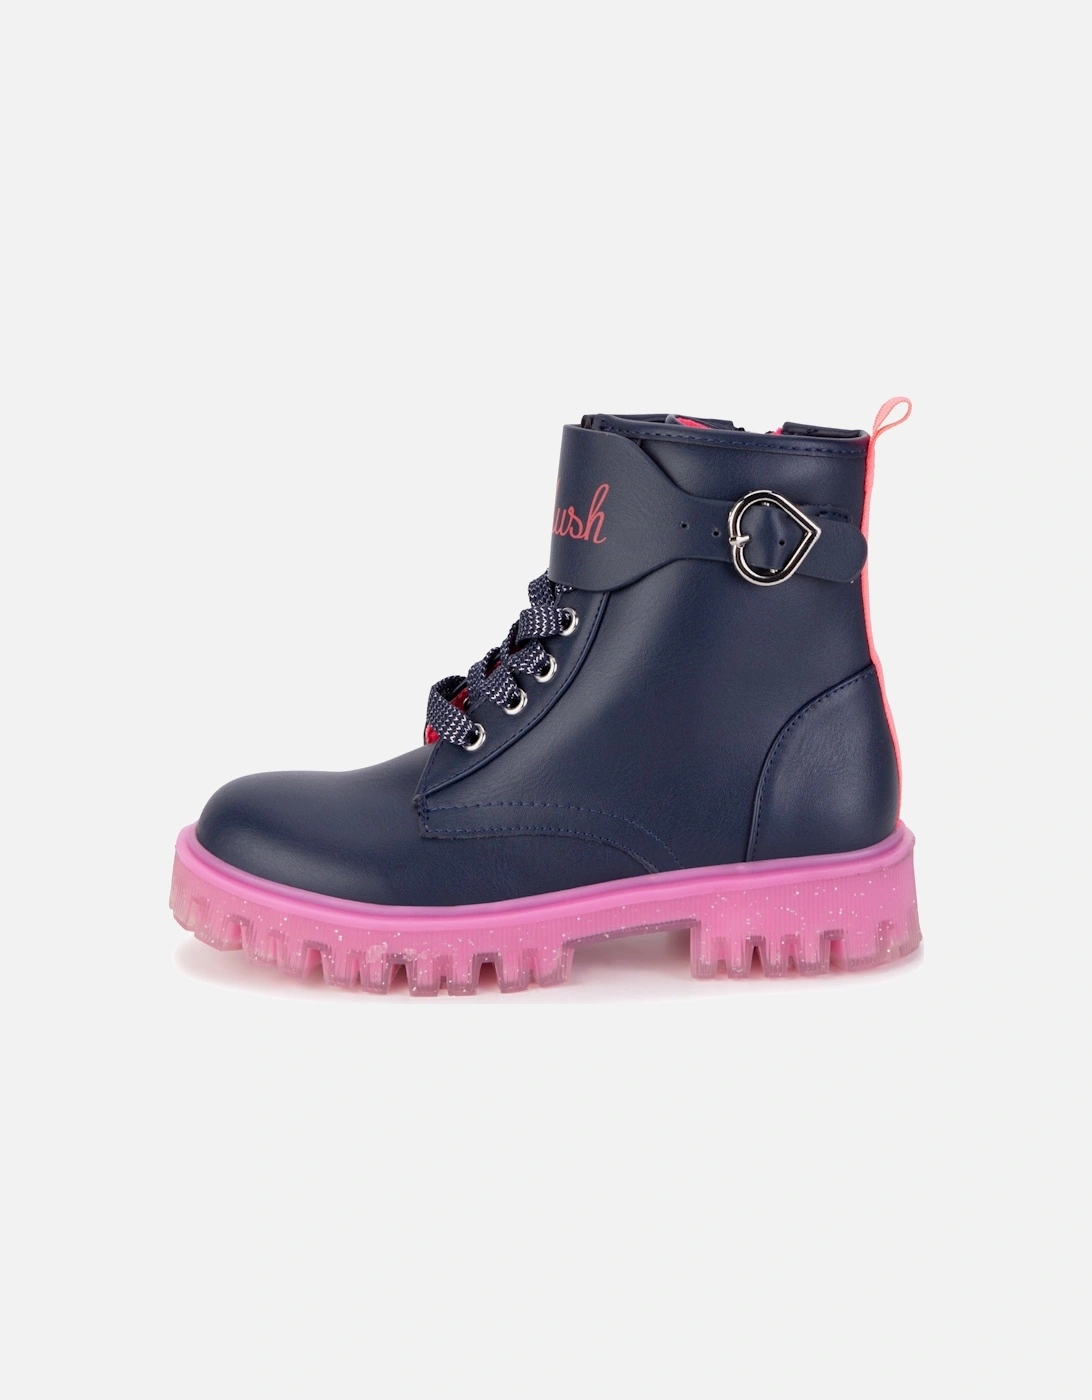 Navy and Pink Boots